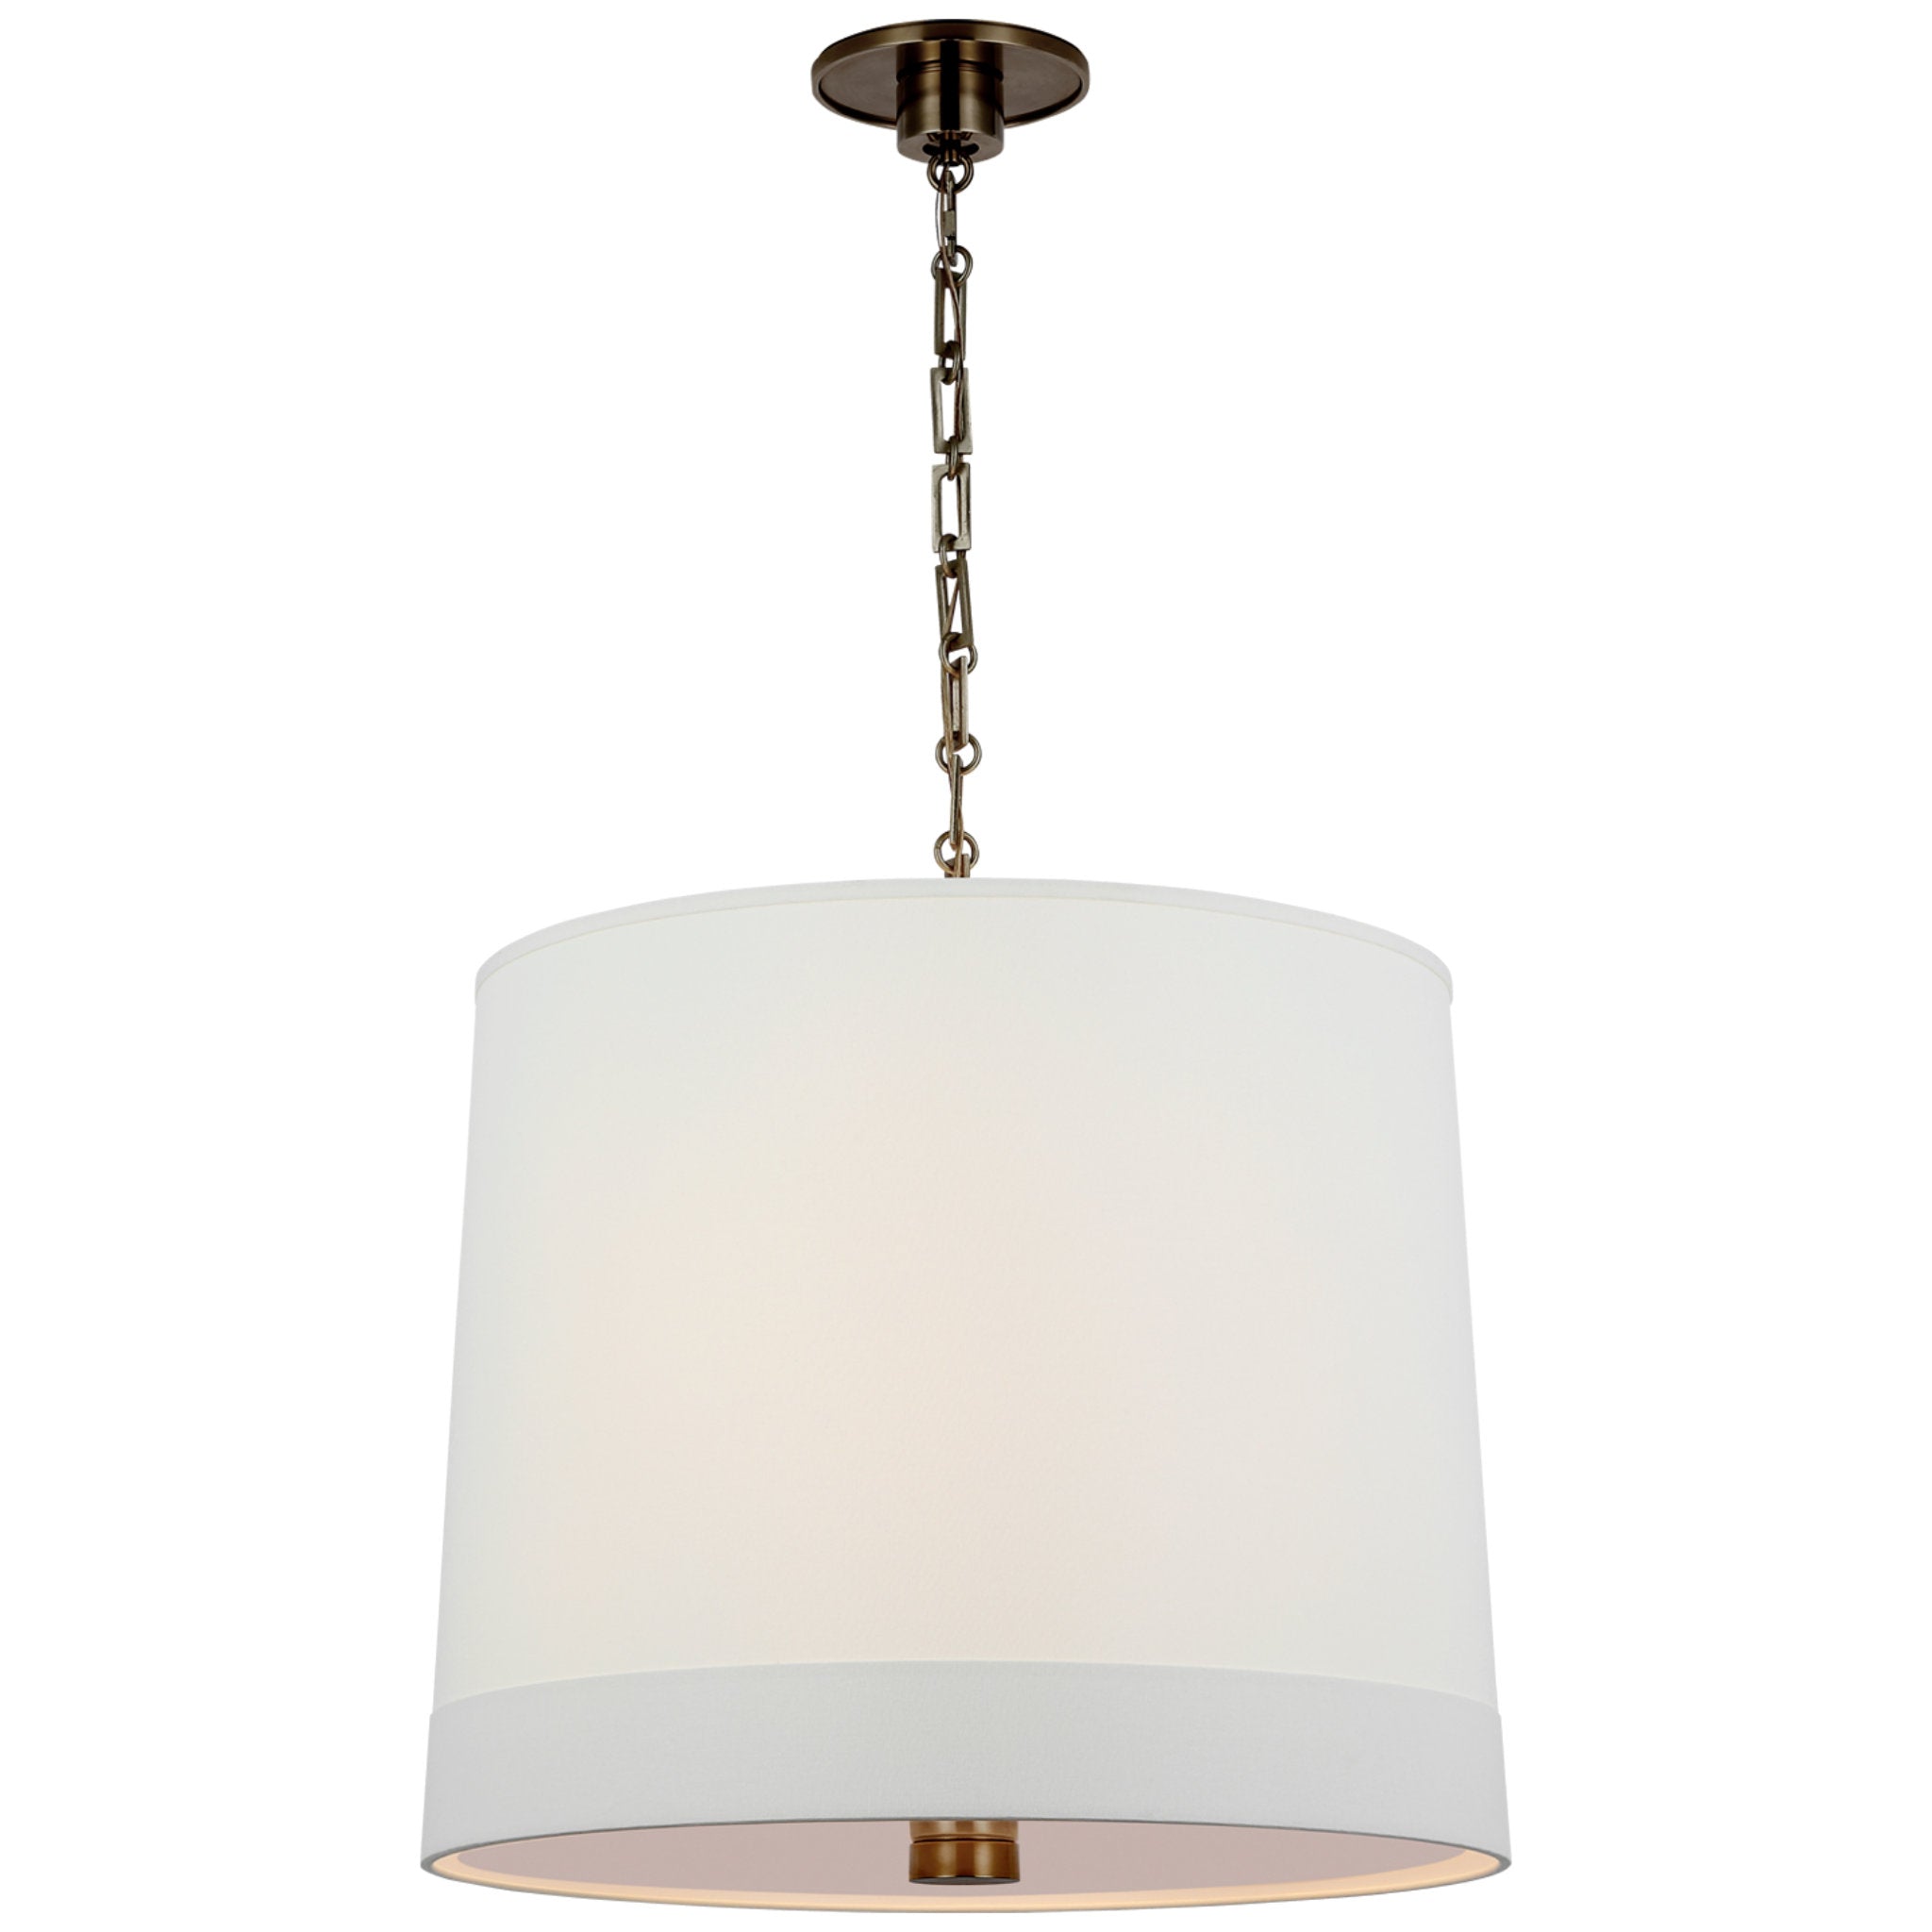 BBL5015SBS by Visual Comfort - Simple Scallop Large Hanging Shade